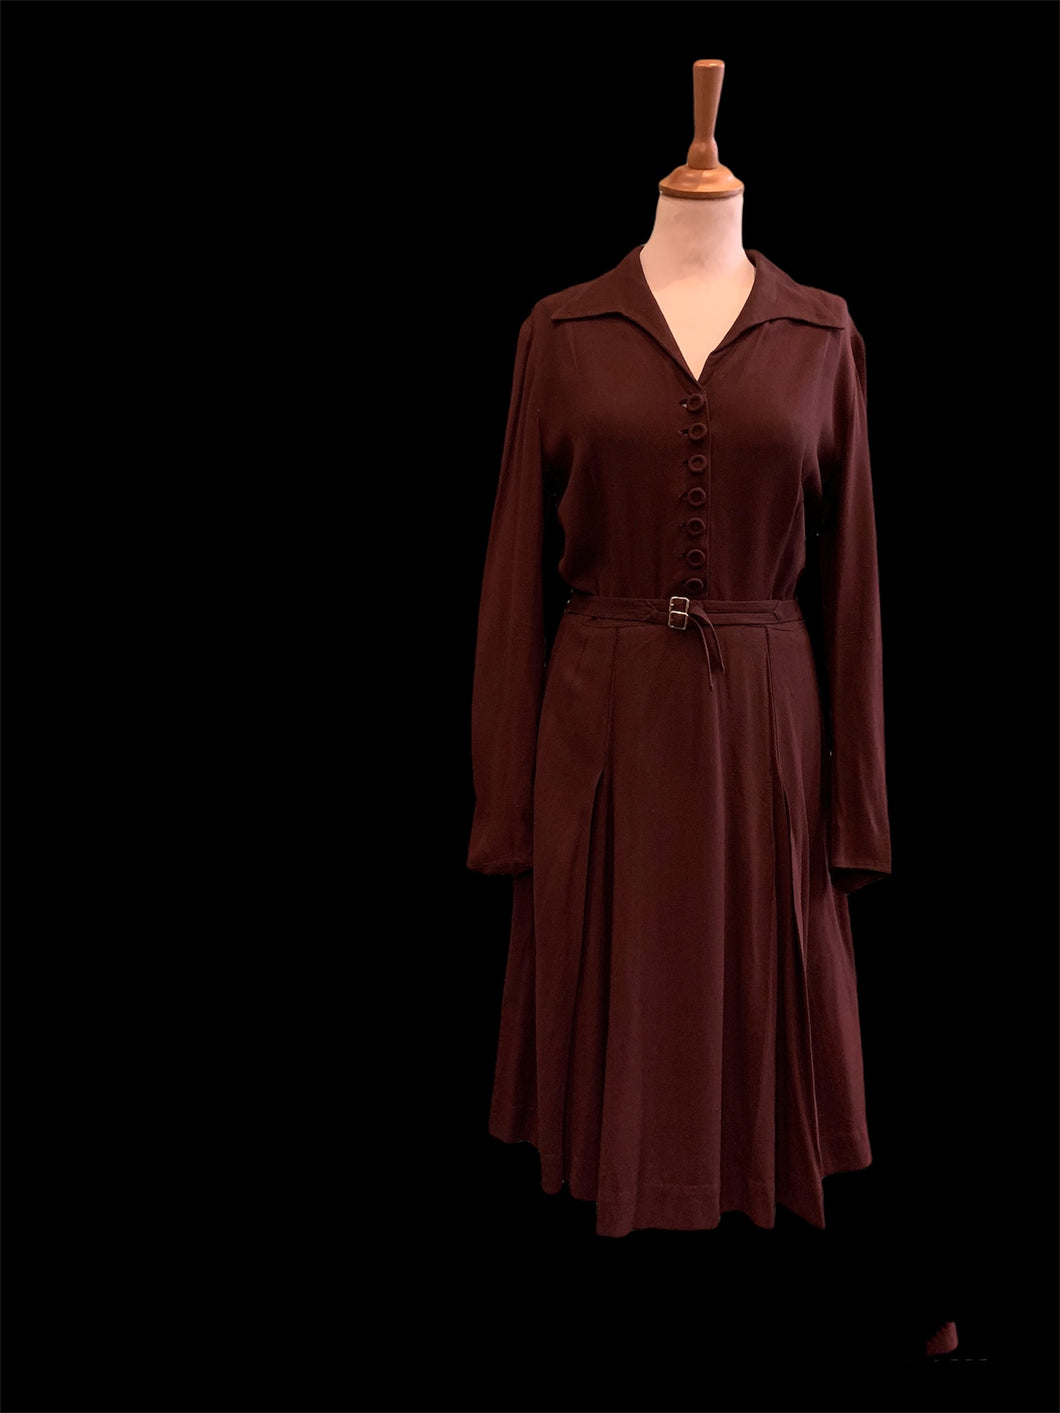 Robe années 40. Taille M